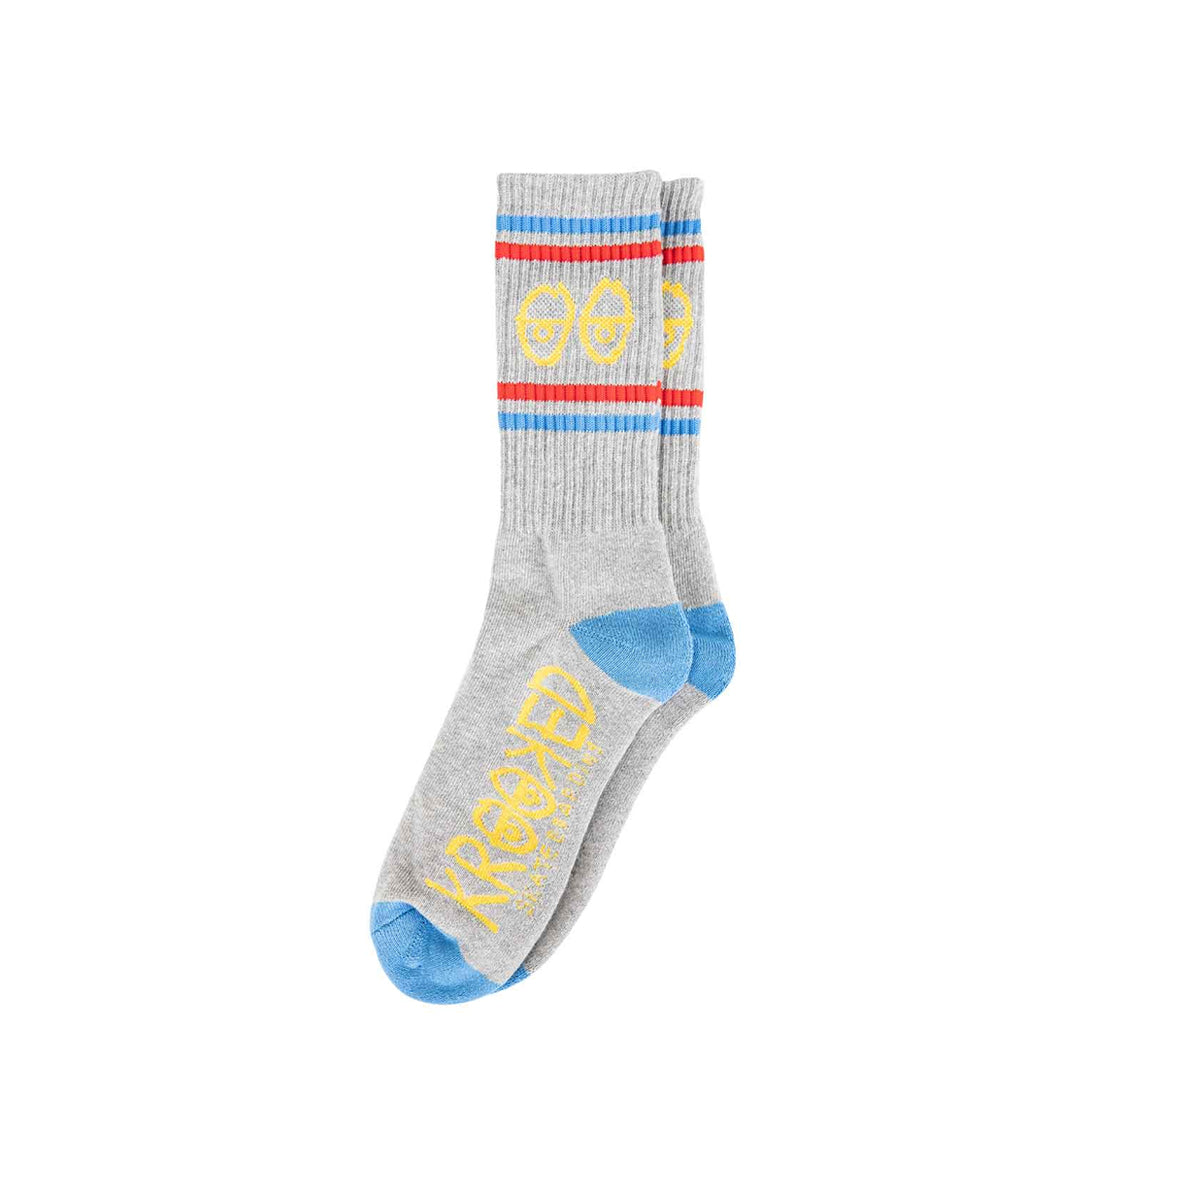 Krooked Eyes Socks (Heather/Yellow/Blue/Red)